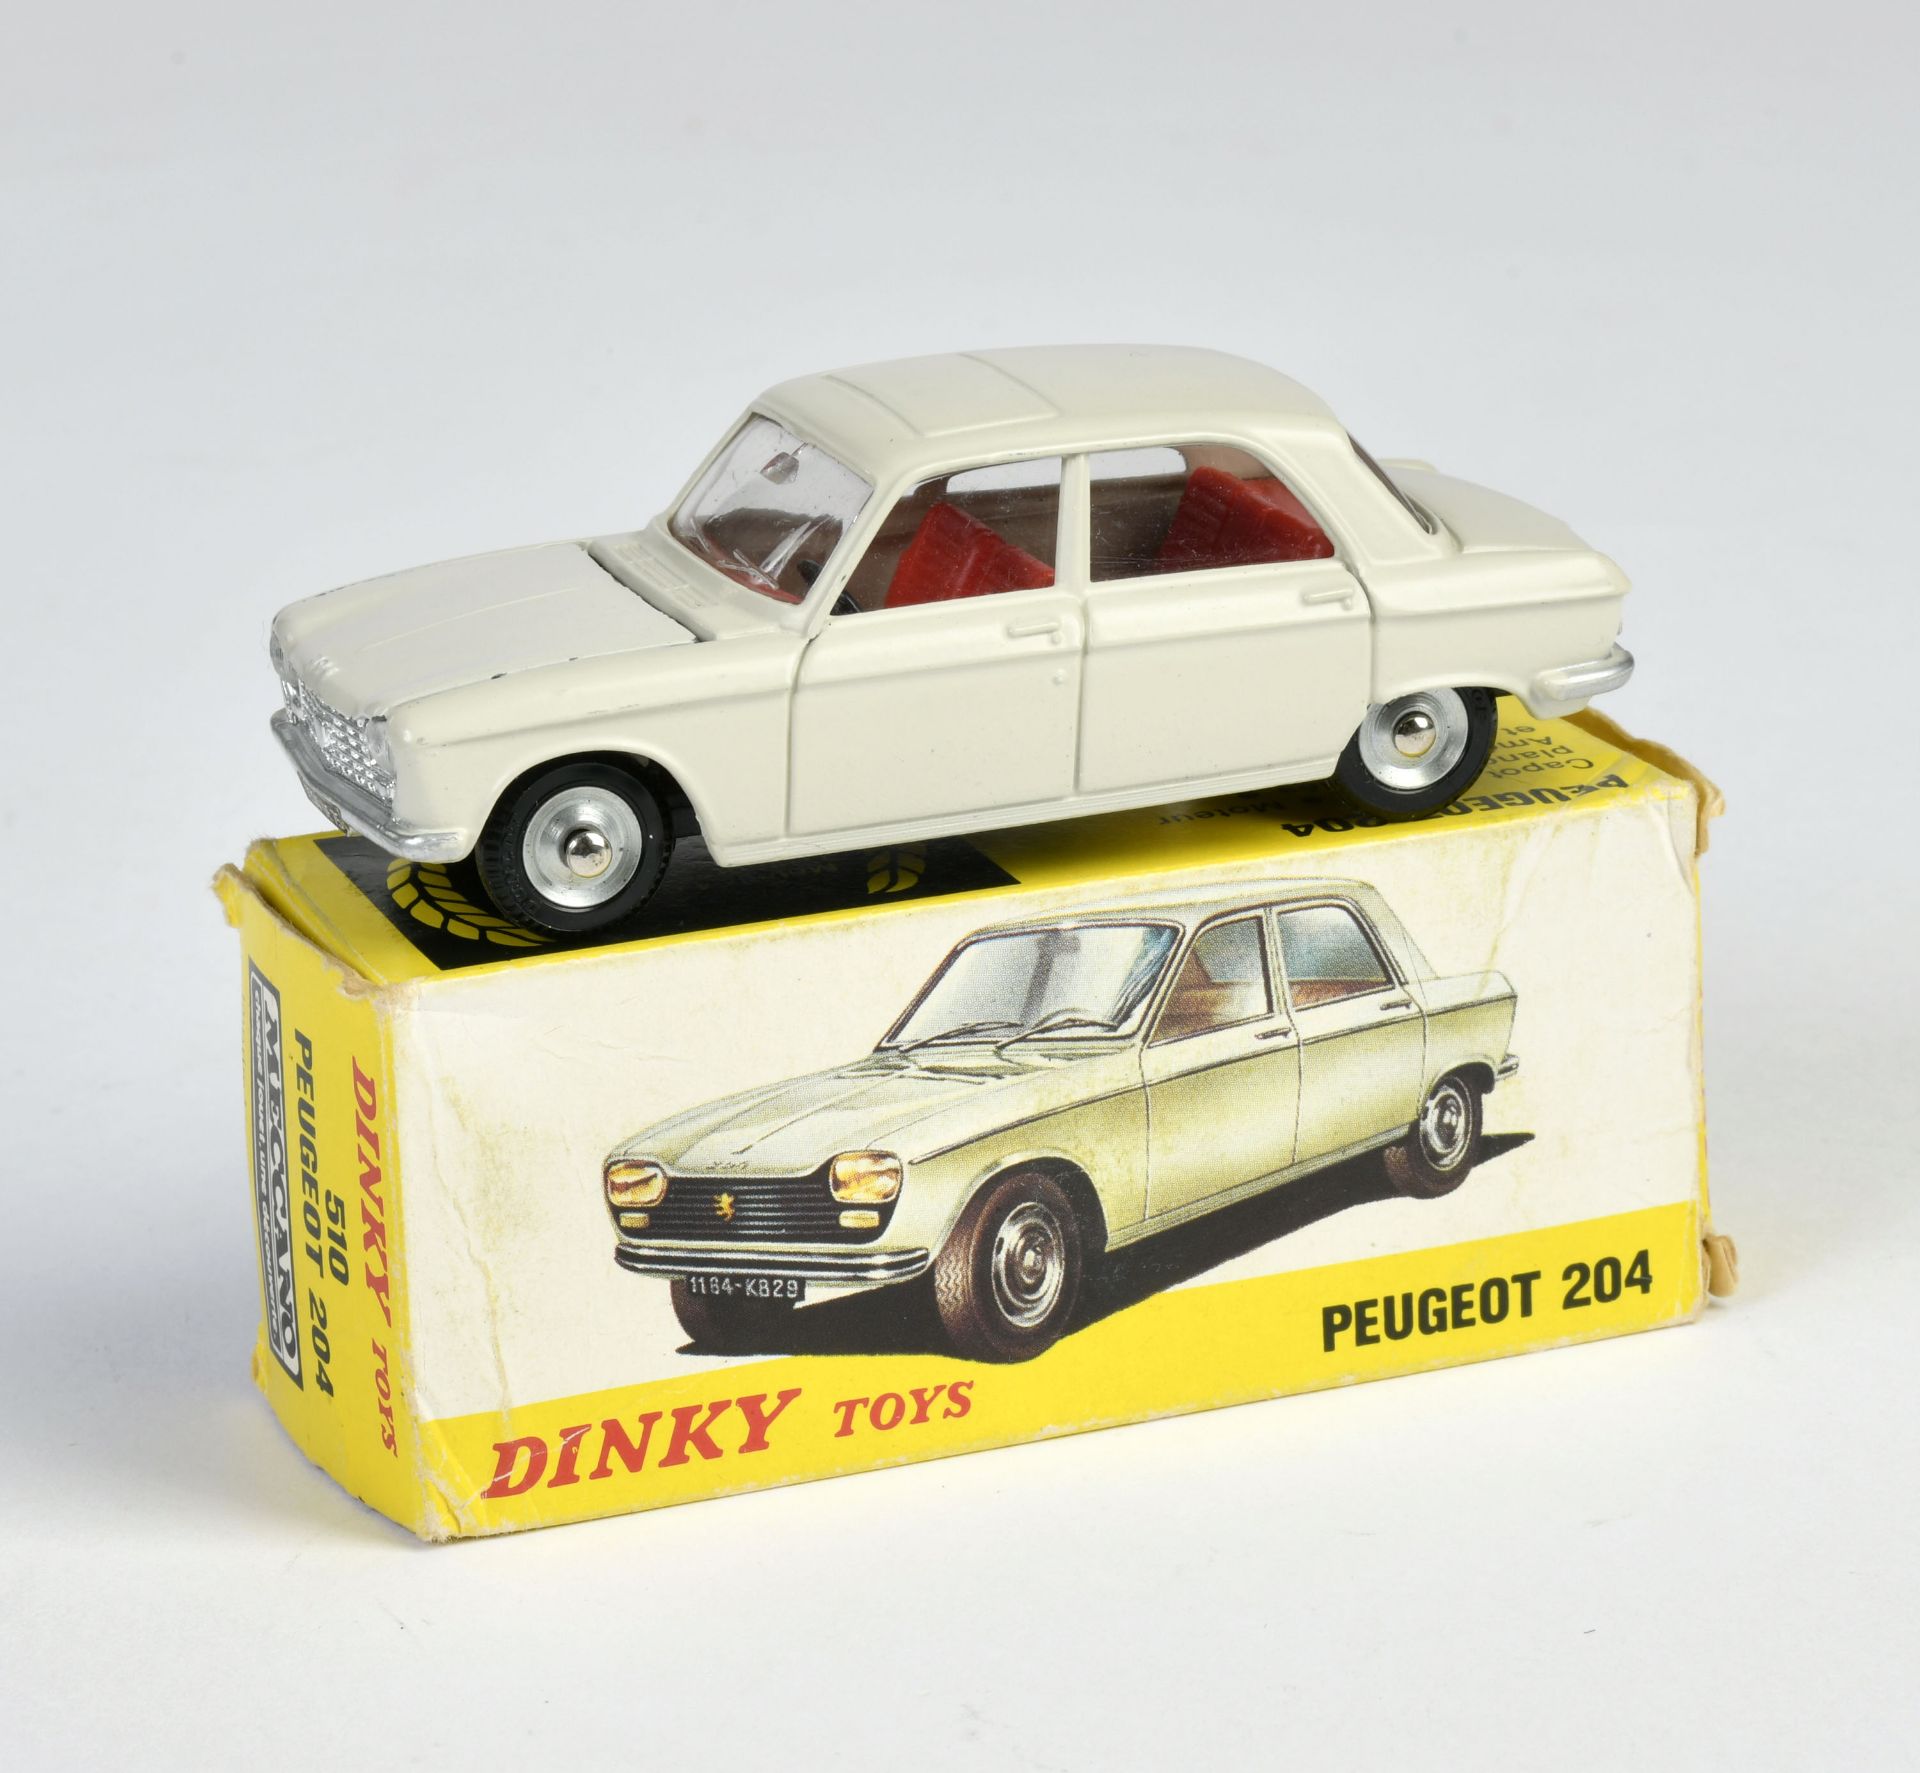 Dinky Toys, 510 Peugeot 204, grey, red Interior, England, 1:43, diecast, box C 2, C 1